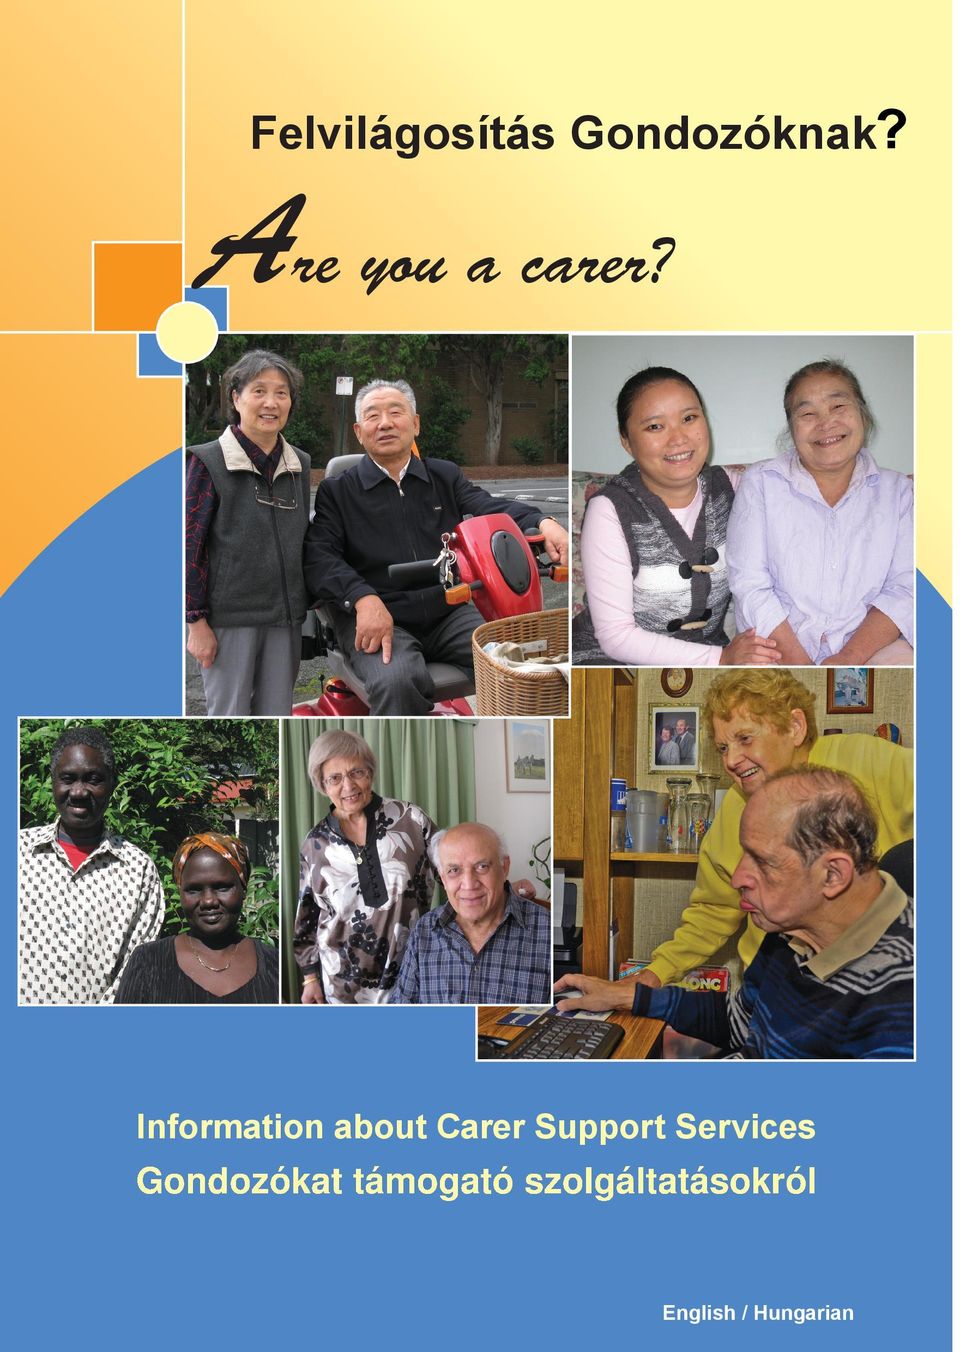 Information about Carer